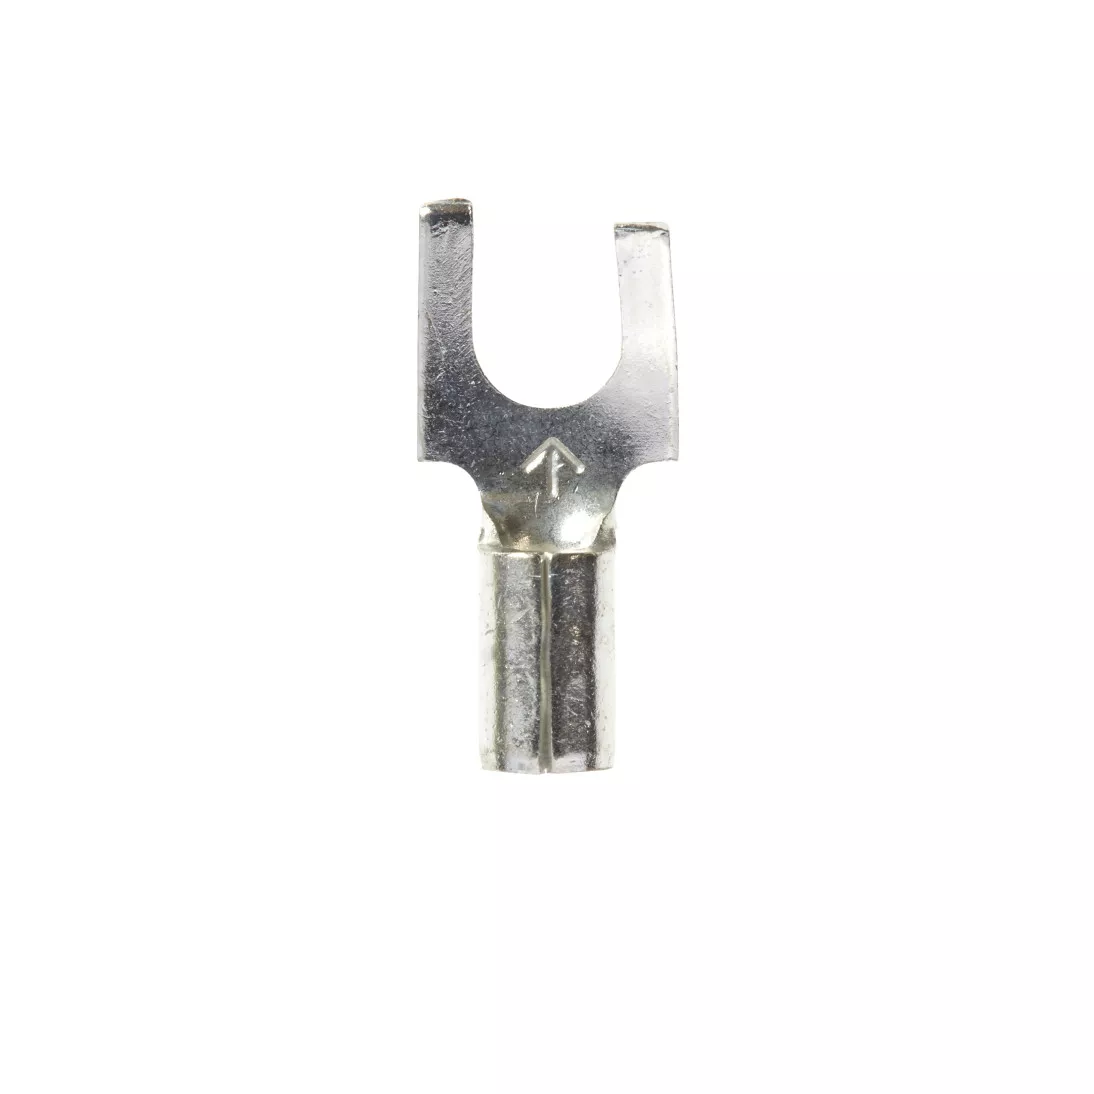 3M™ Scotchlok™ Block Fork, Non-Insulated Butted Seam MU14-8FBK, Stud
Size 8, suitable for use in a terminal block, 1000/Case